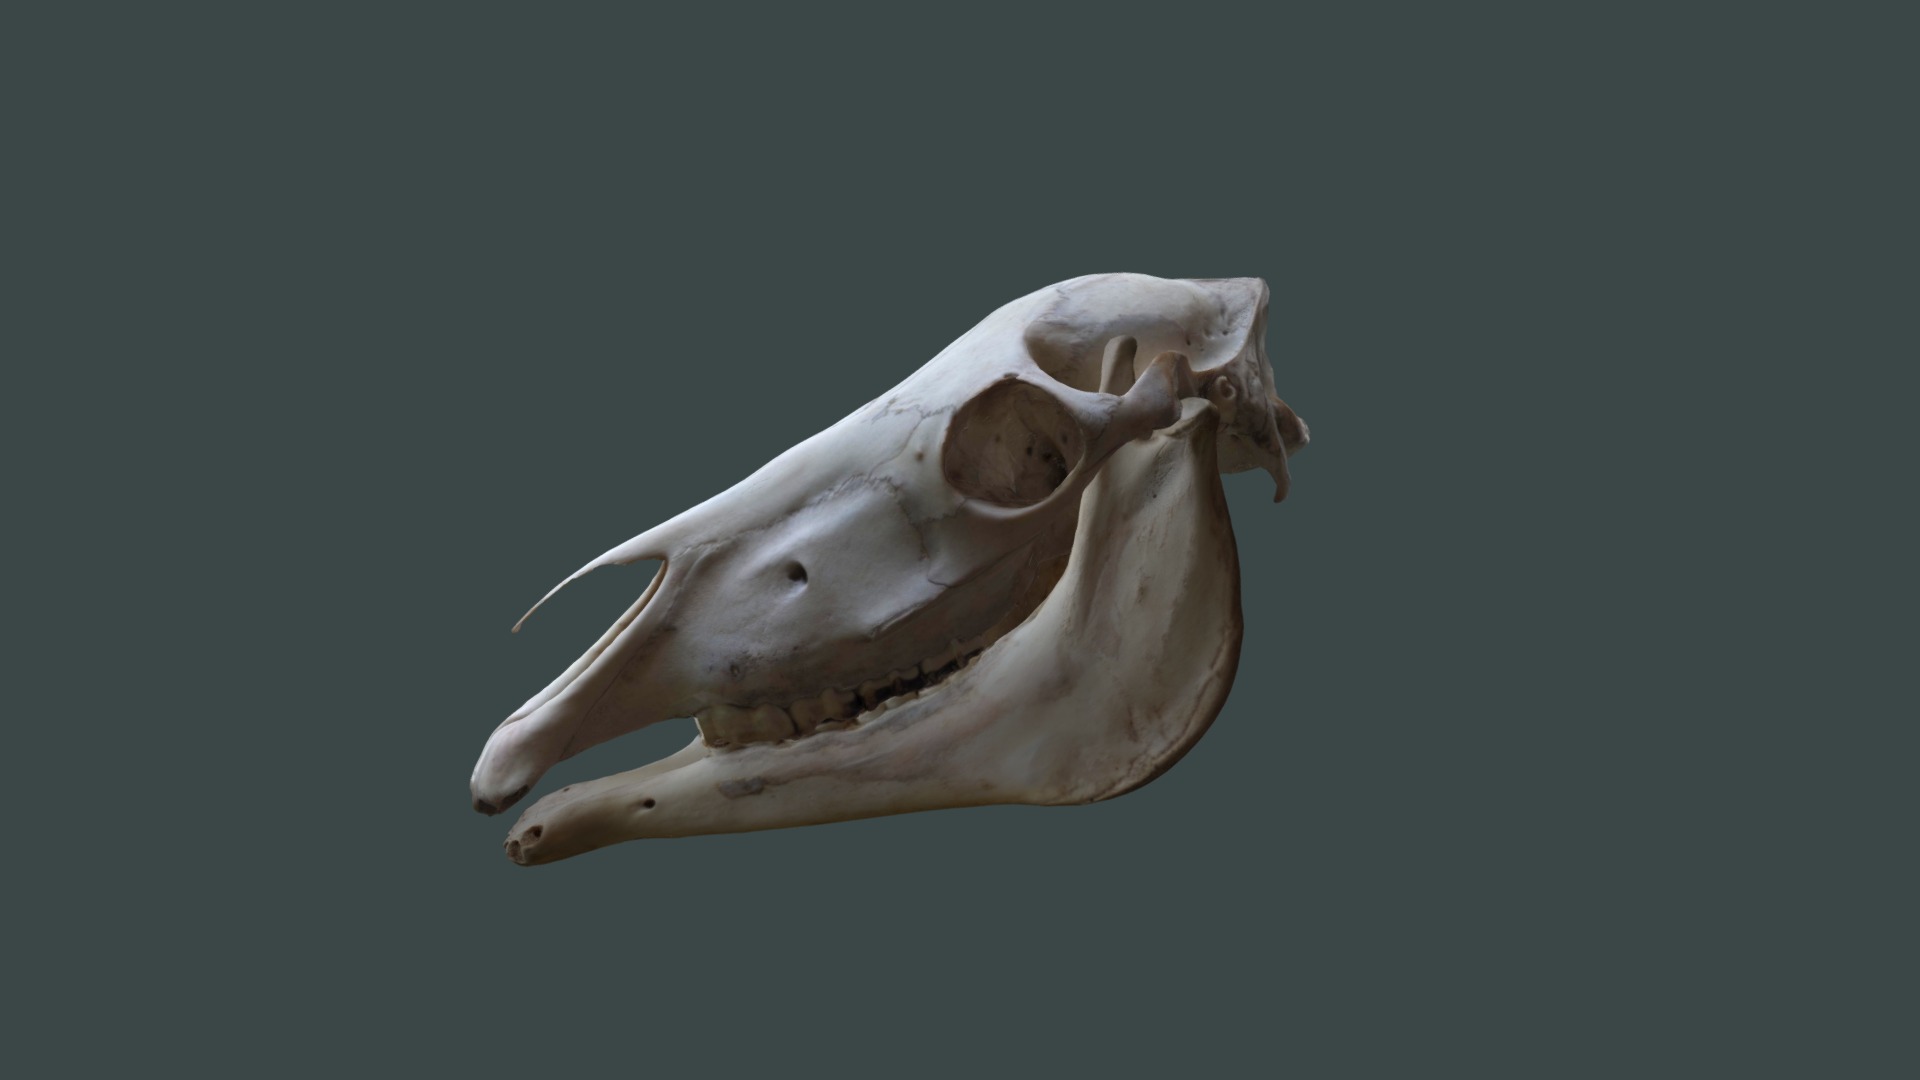 3D model Photogrametry Horse Skull - This is a 3D model of the Photogrametry Horse Skull. The 3D model is about a skull of an animal.